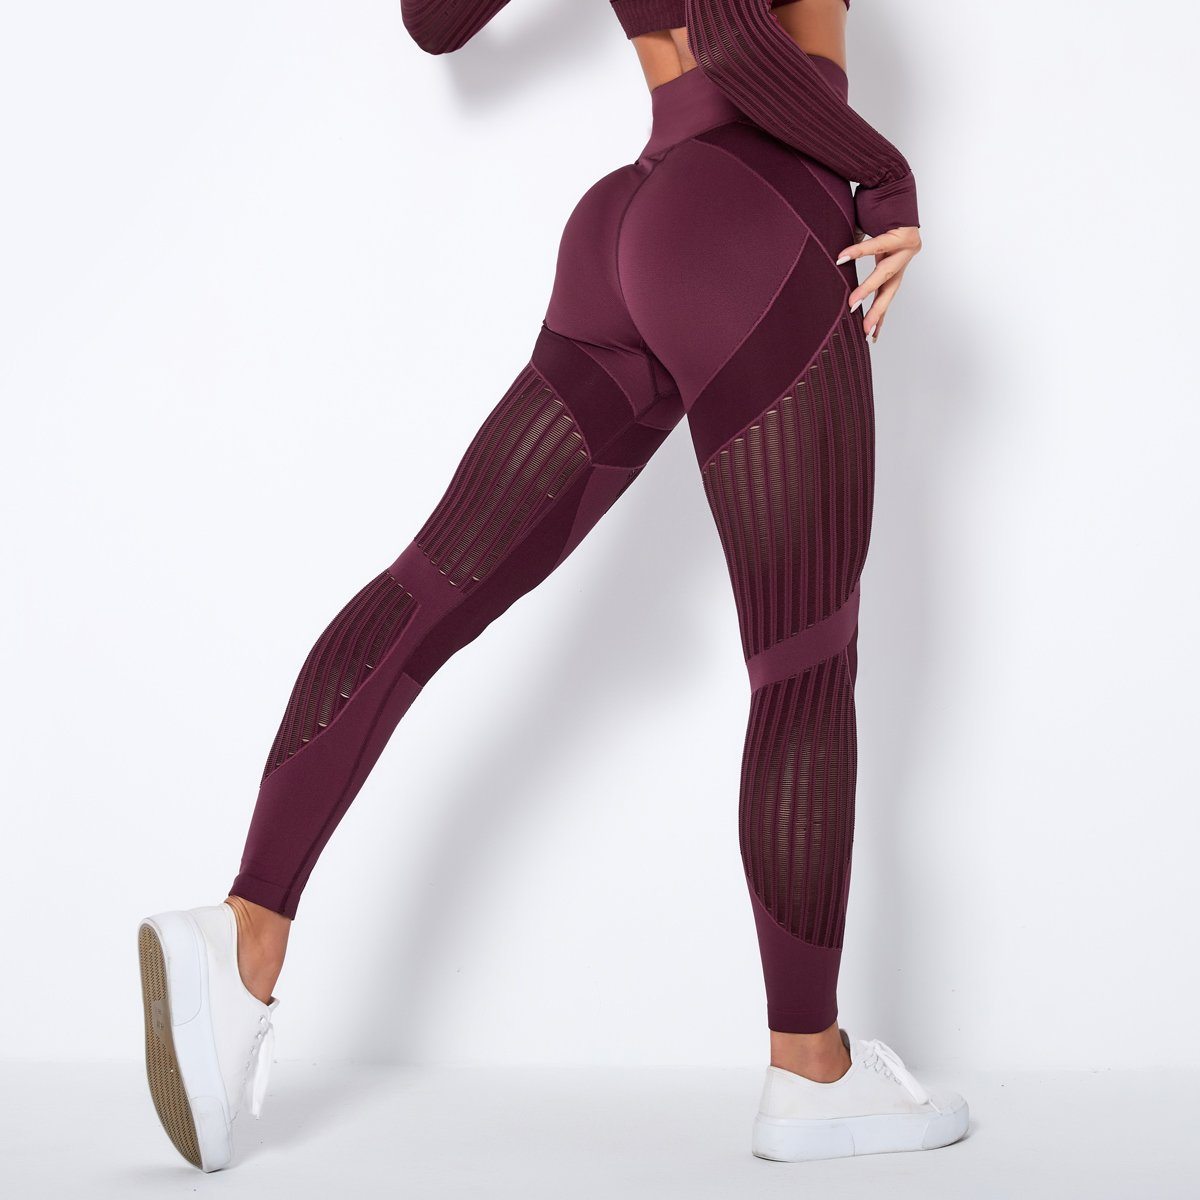 Mesh Spider Web Tights at Rs 699.00, Tights For Women, Gym Workout Tights,  Women Sports Tight, Women Workout Tight, Women Seamless Legging -  Artistspace, Bengaluru